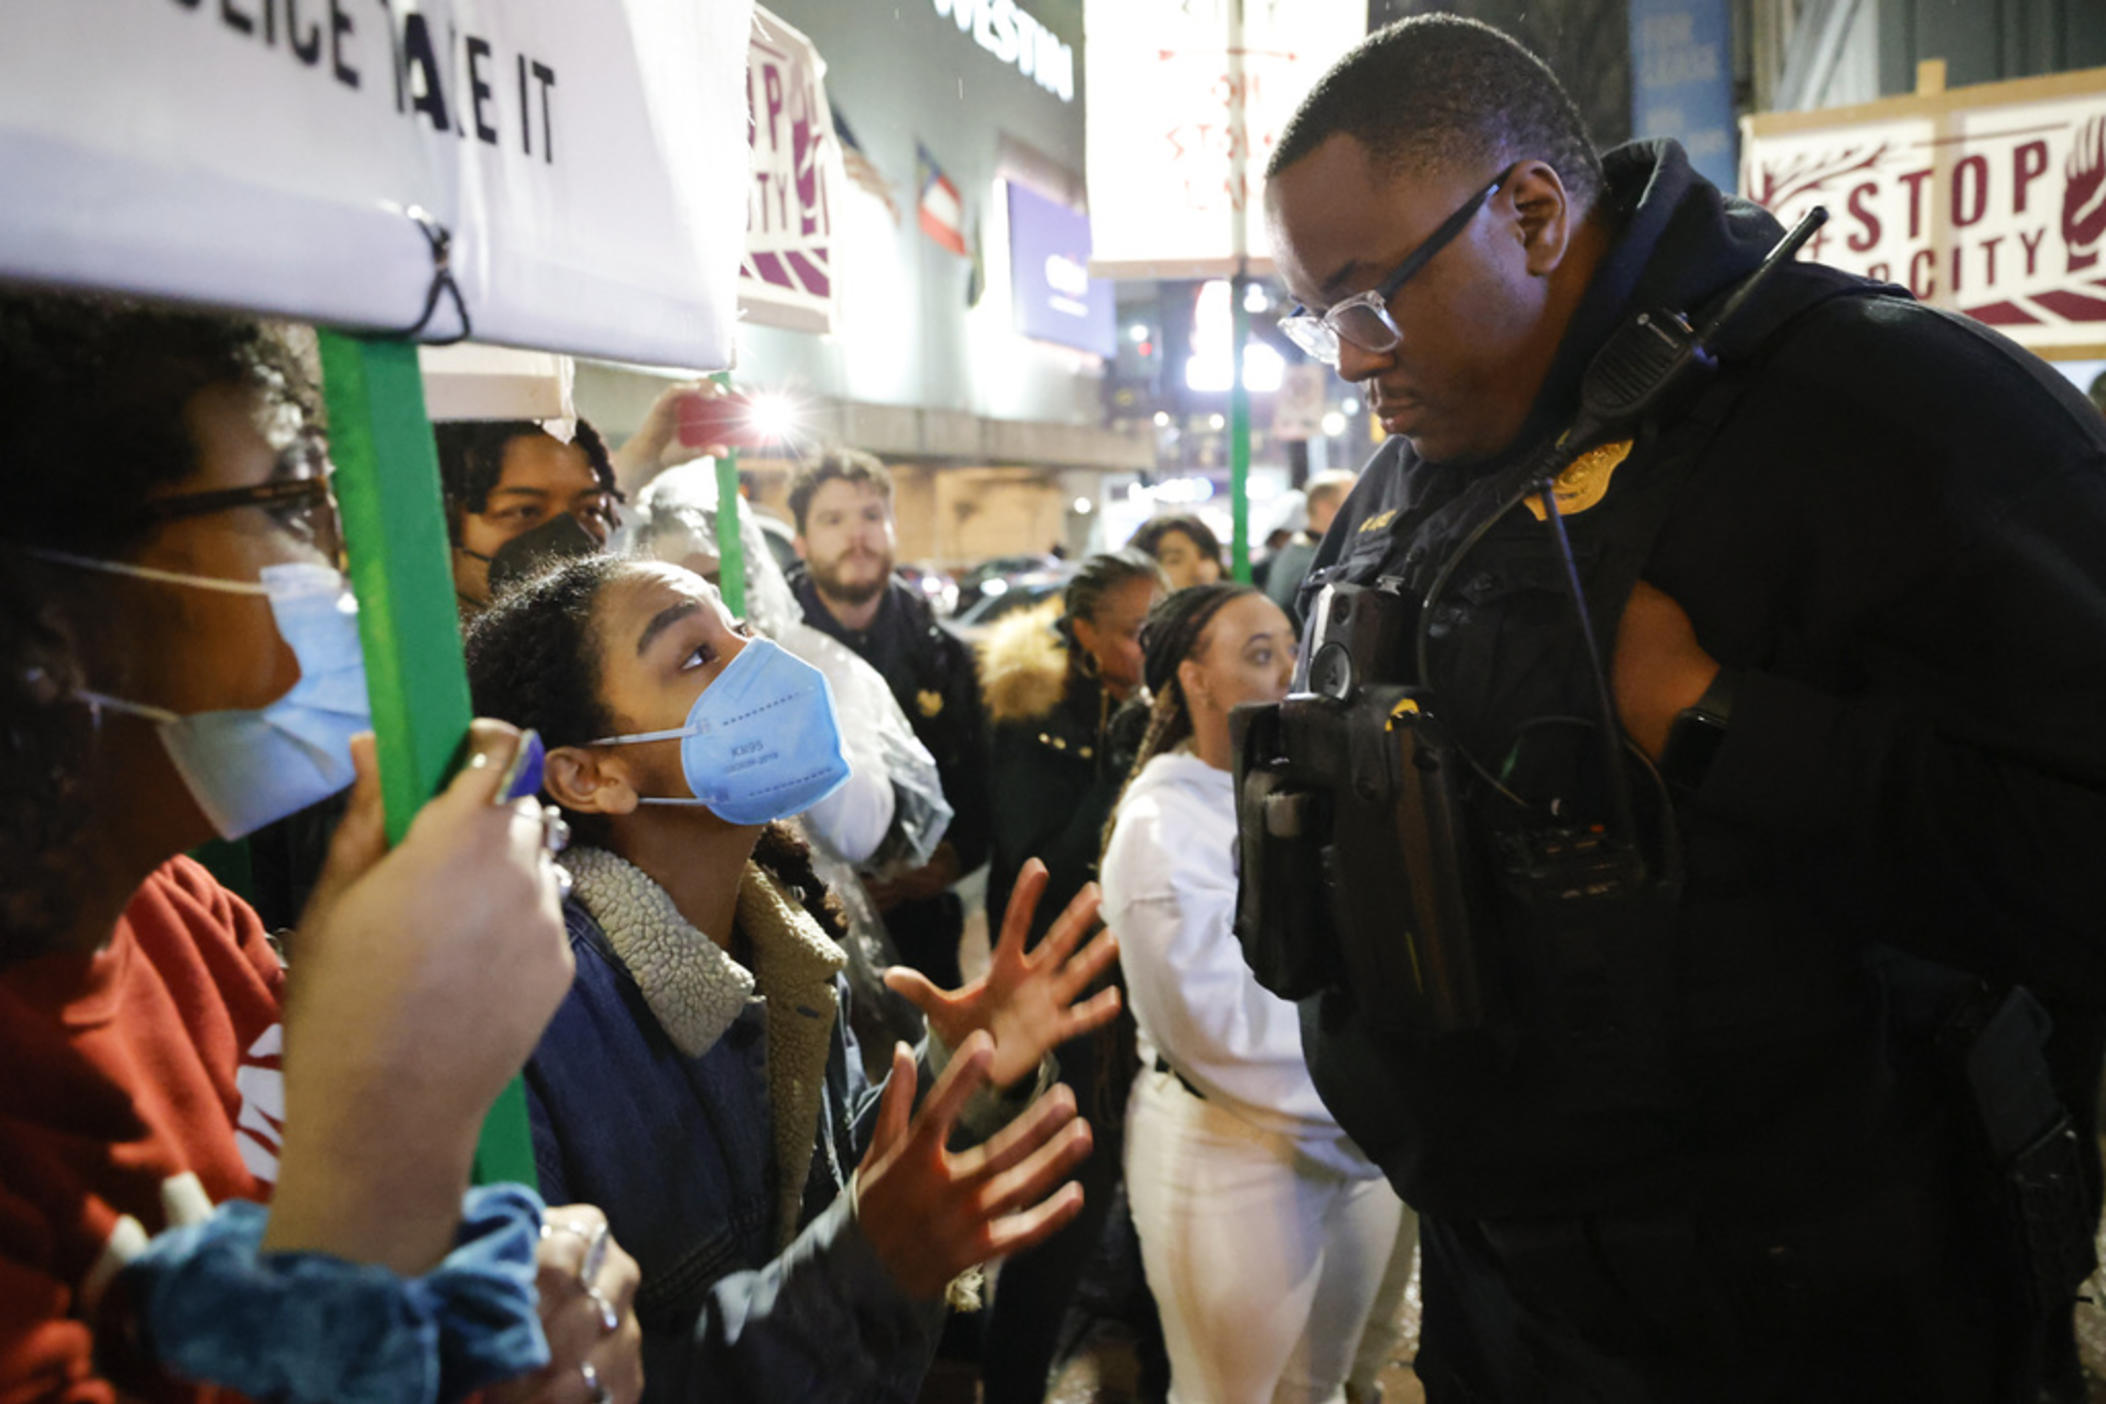 Demonstrators confront an Atlanta police officer during a protest over plans to build a new police training center, Thursday, March 9, 2023, in Atlanta.